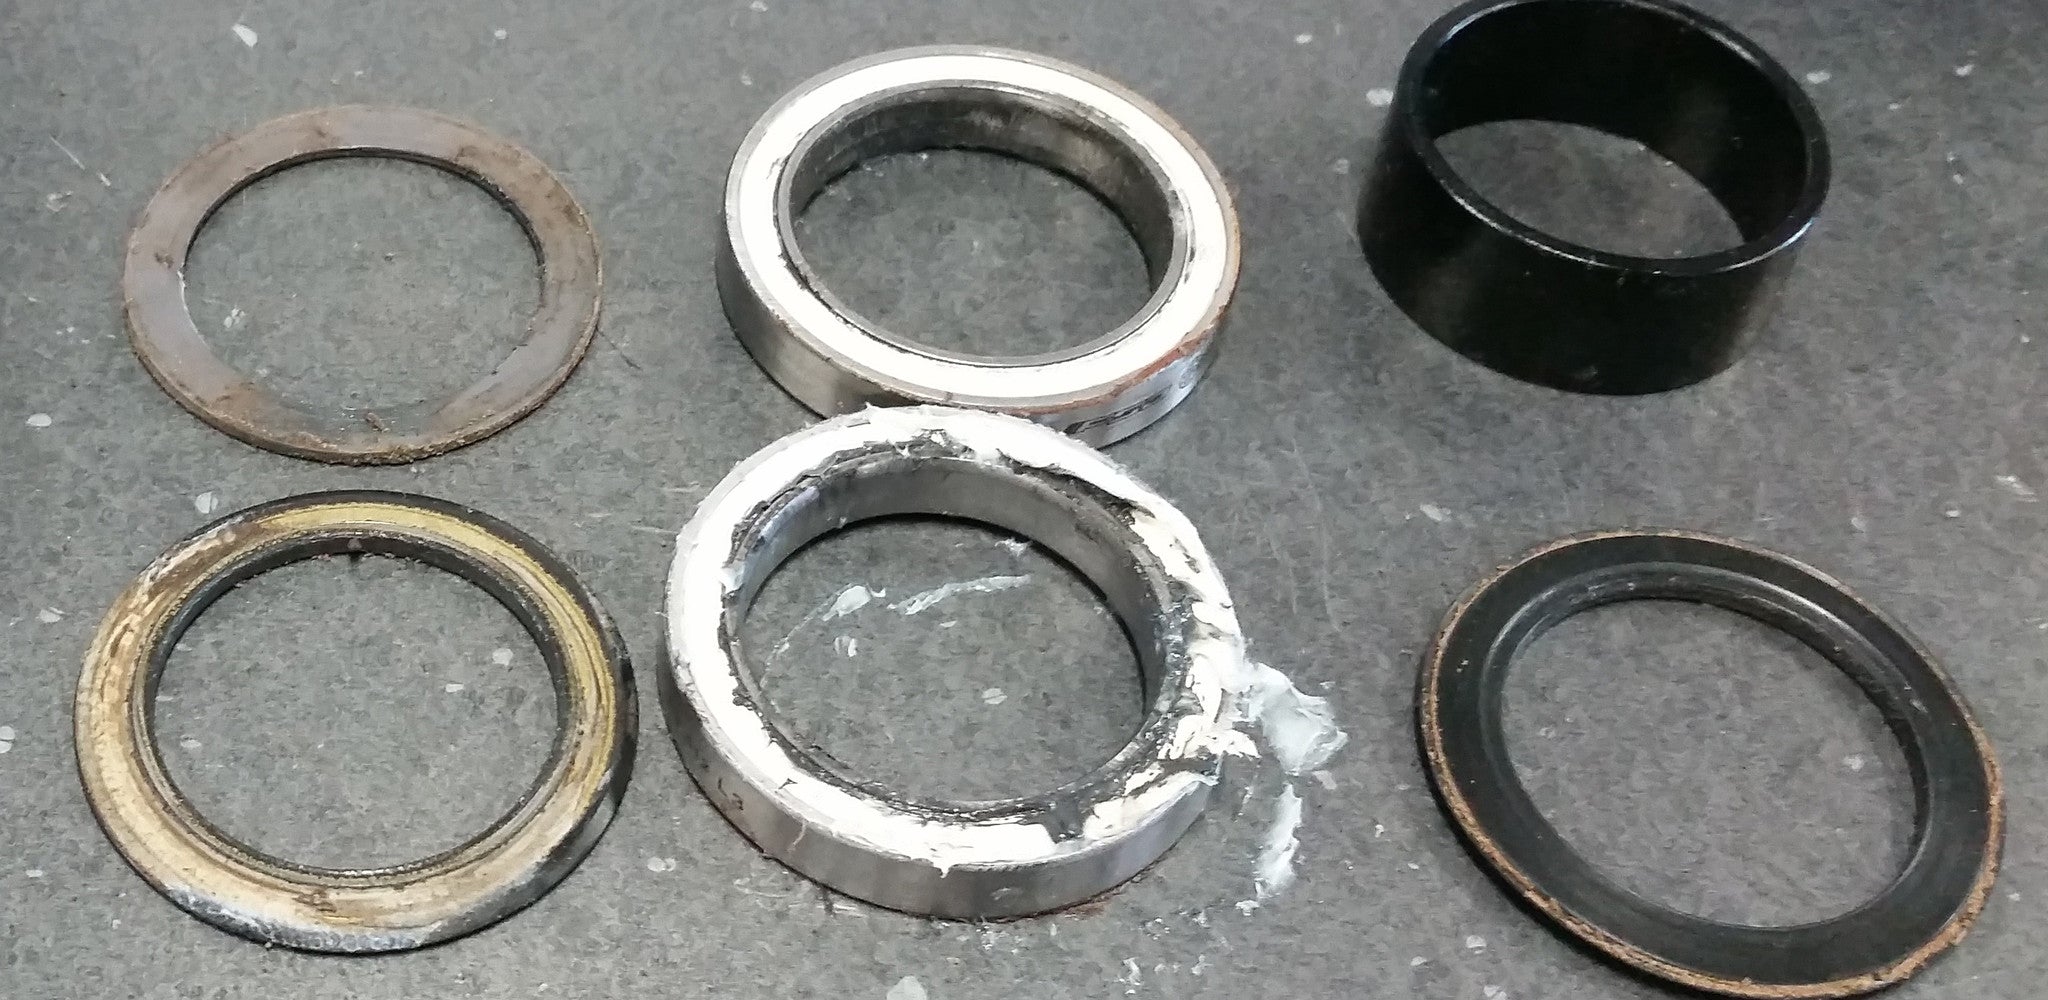 Problems with ceramic bearings, part one